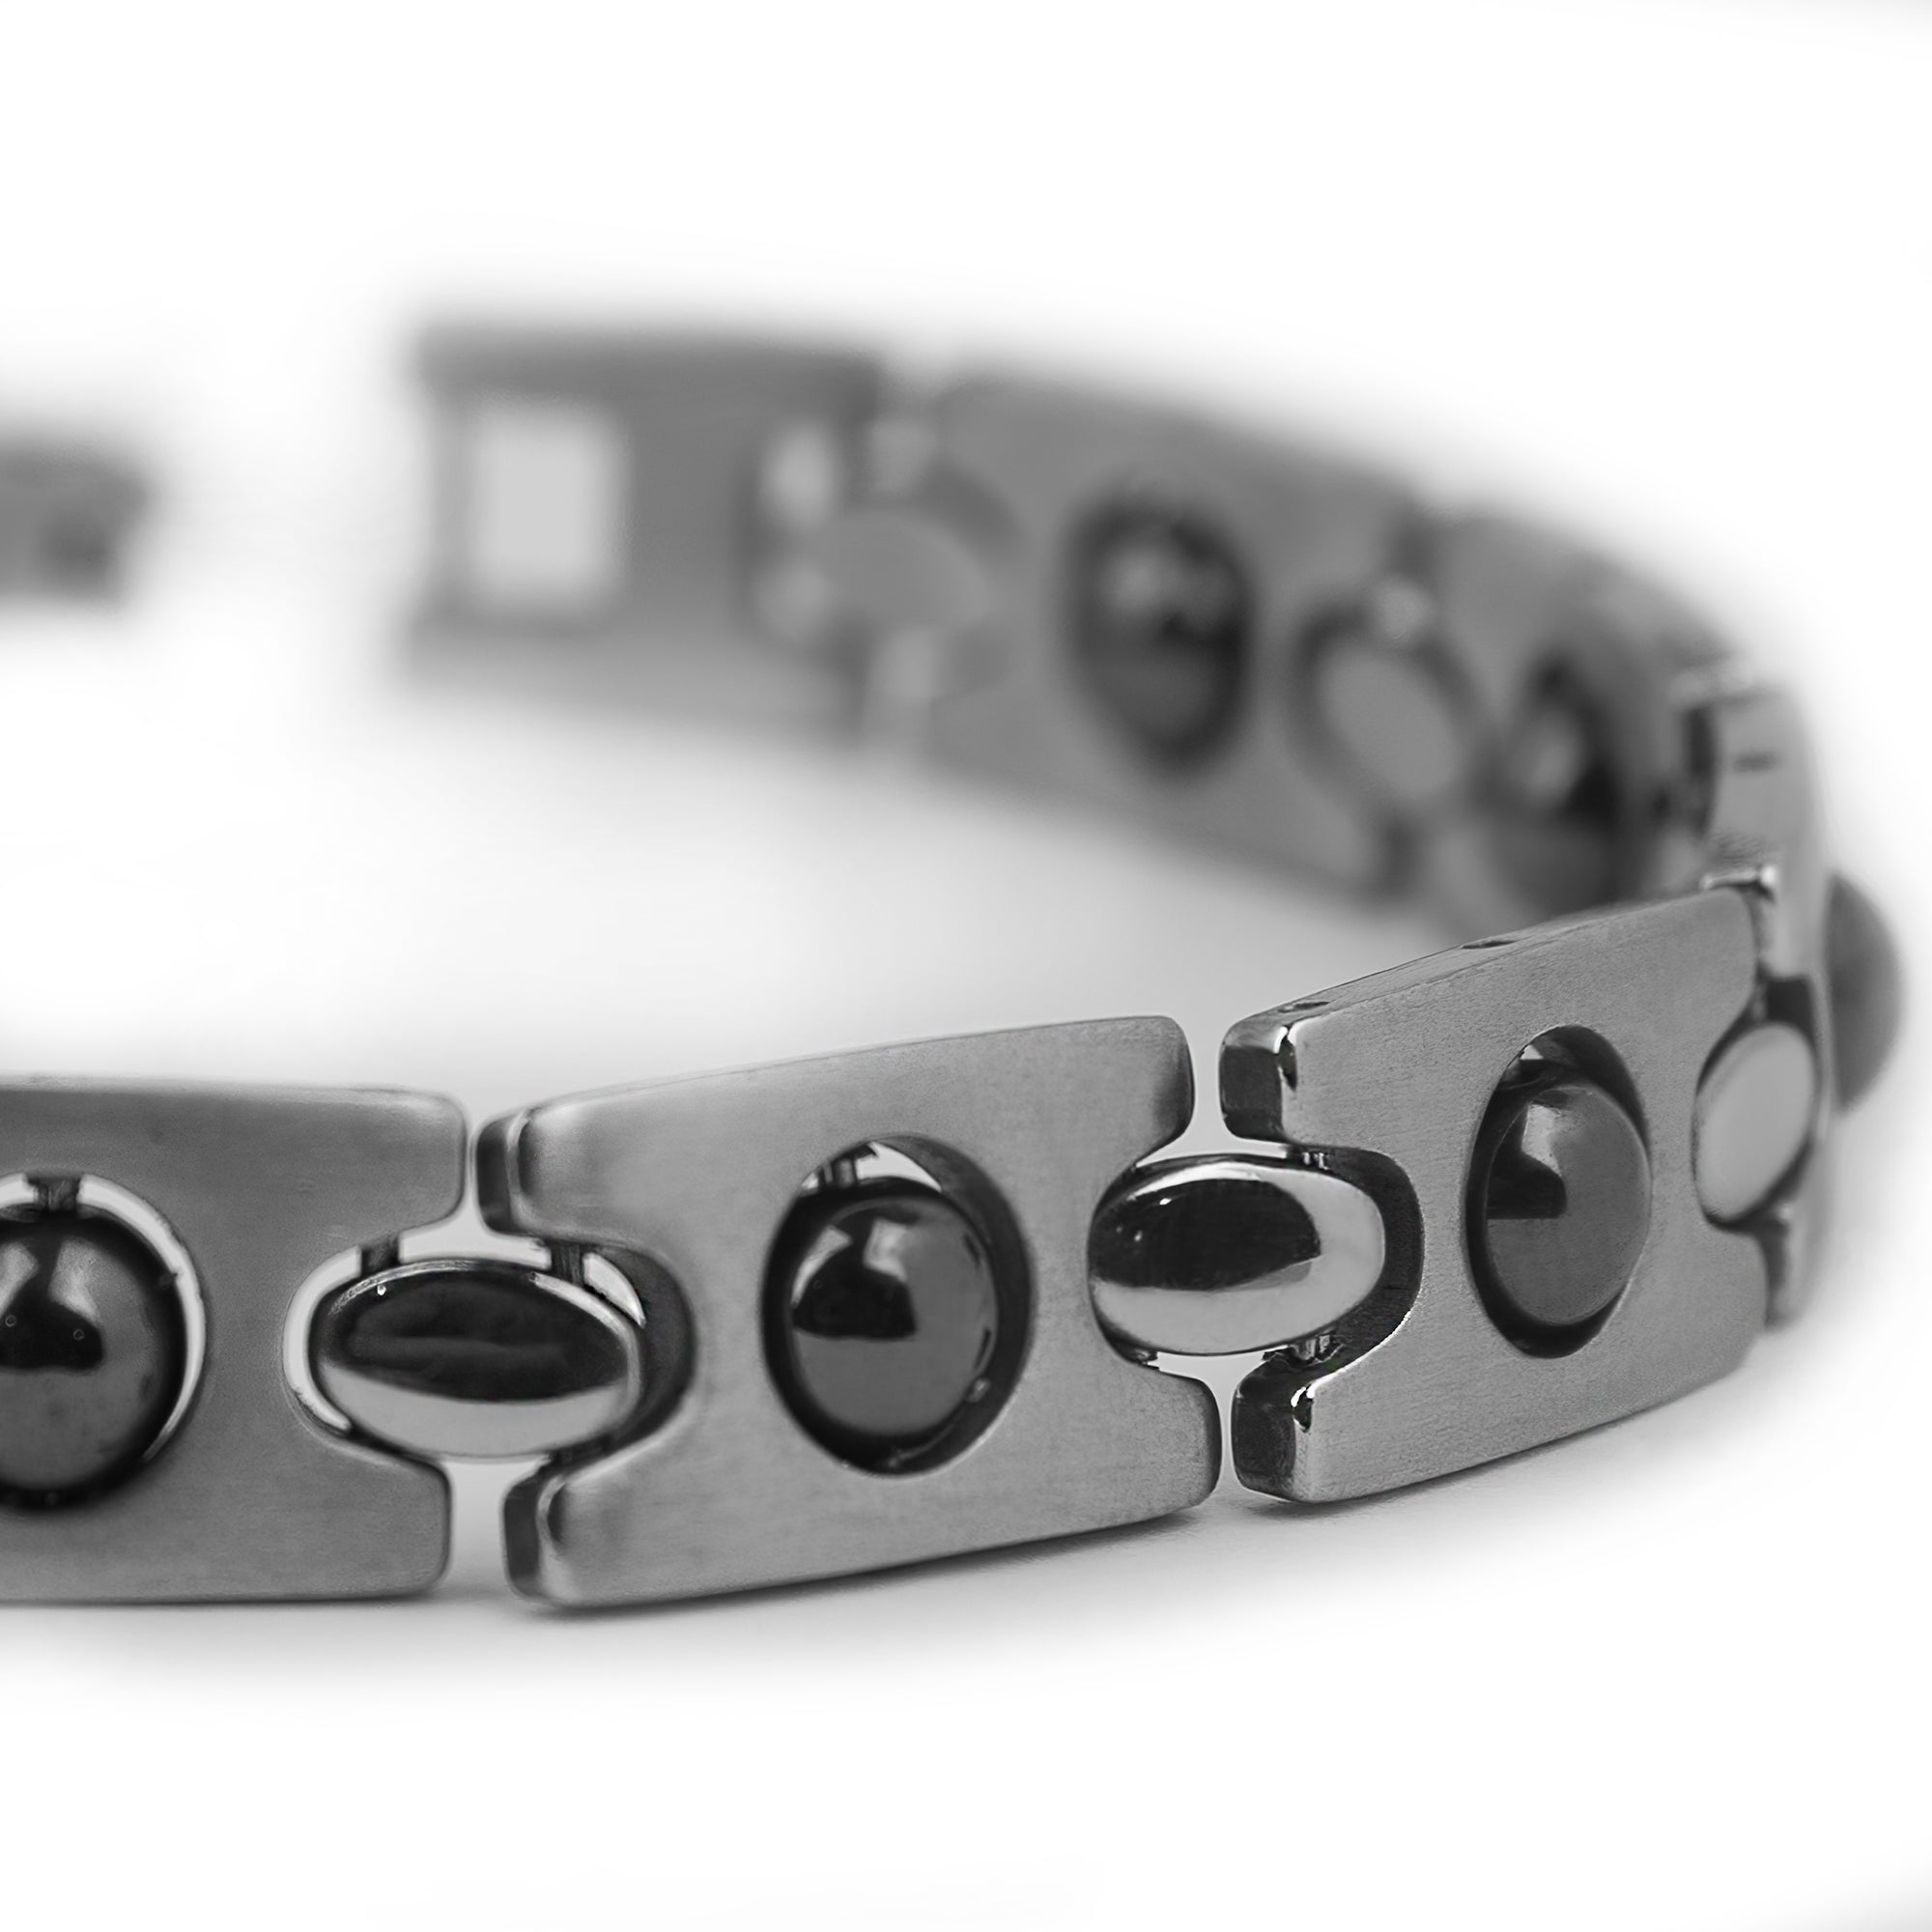 Stainless Steel Men's Bracelet with Magnetic Balls For Body Health & Relaxation, Colorado COL033-01